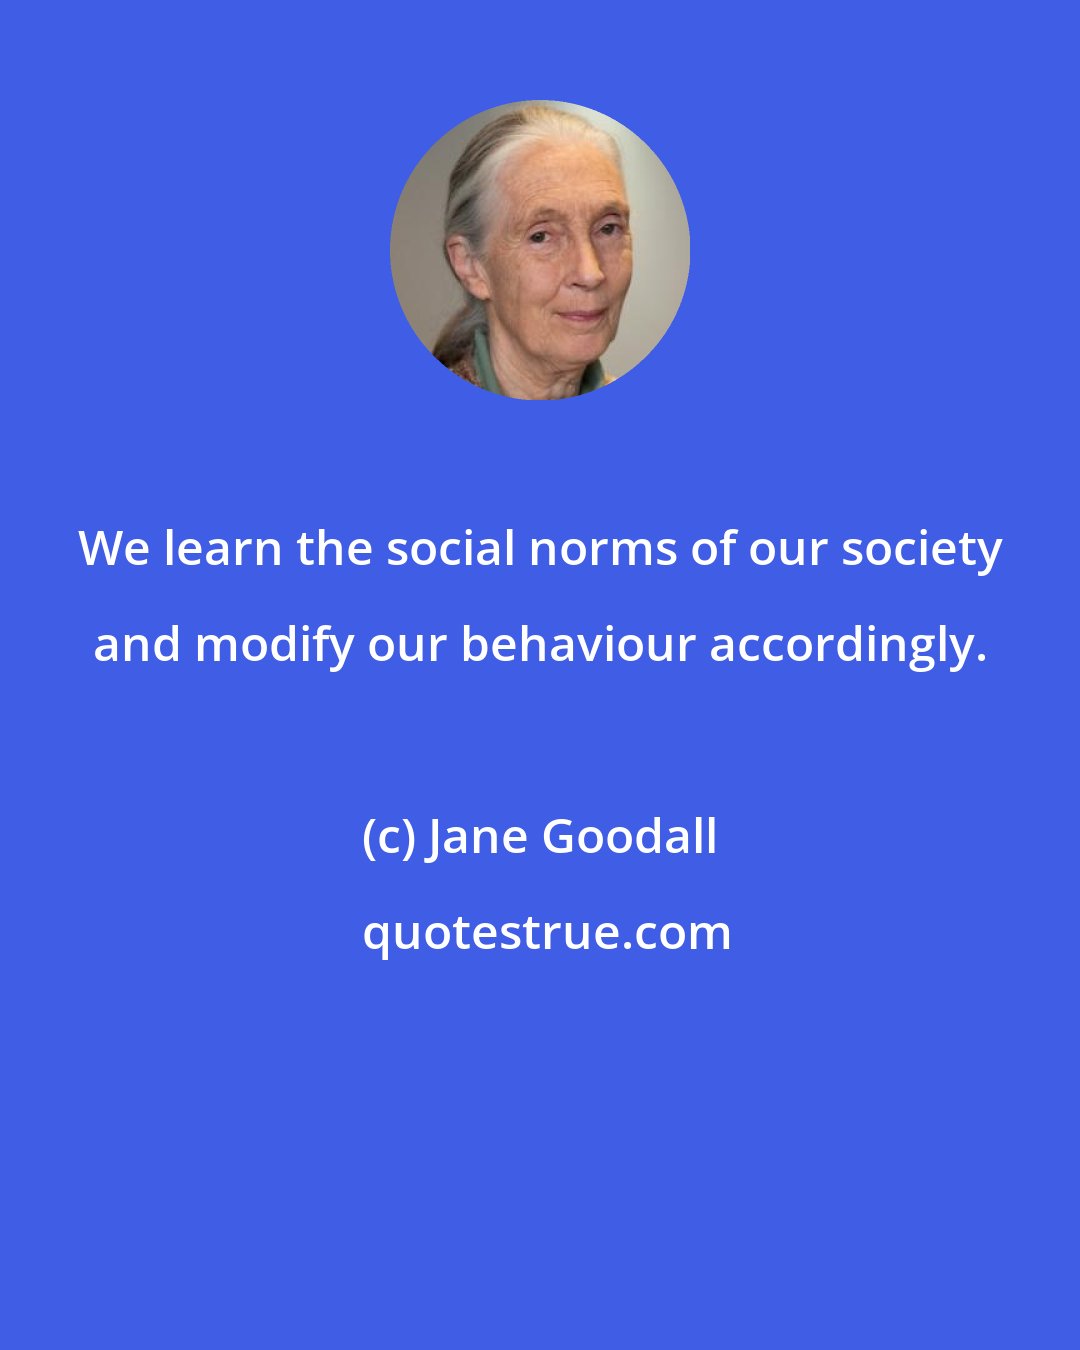 Jane Goodall: We learn the social norms of our society and modify our behaviour accordingly.